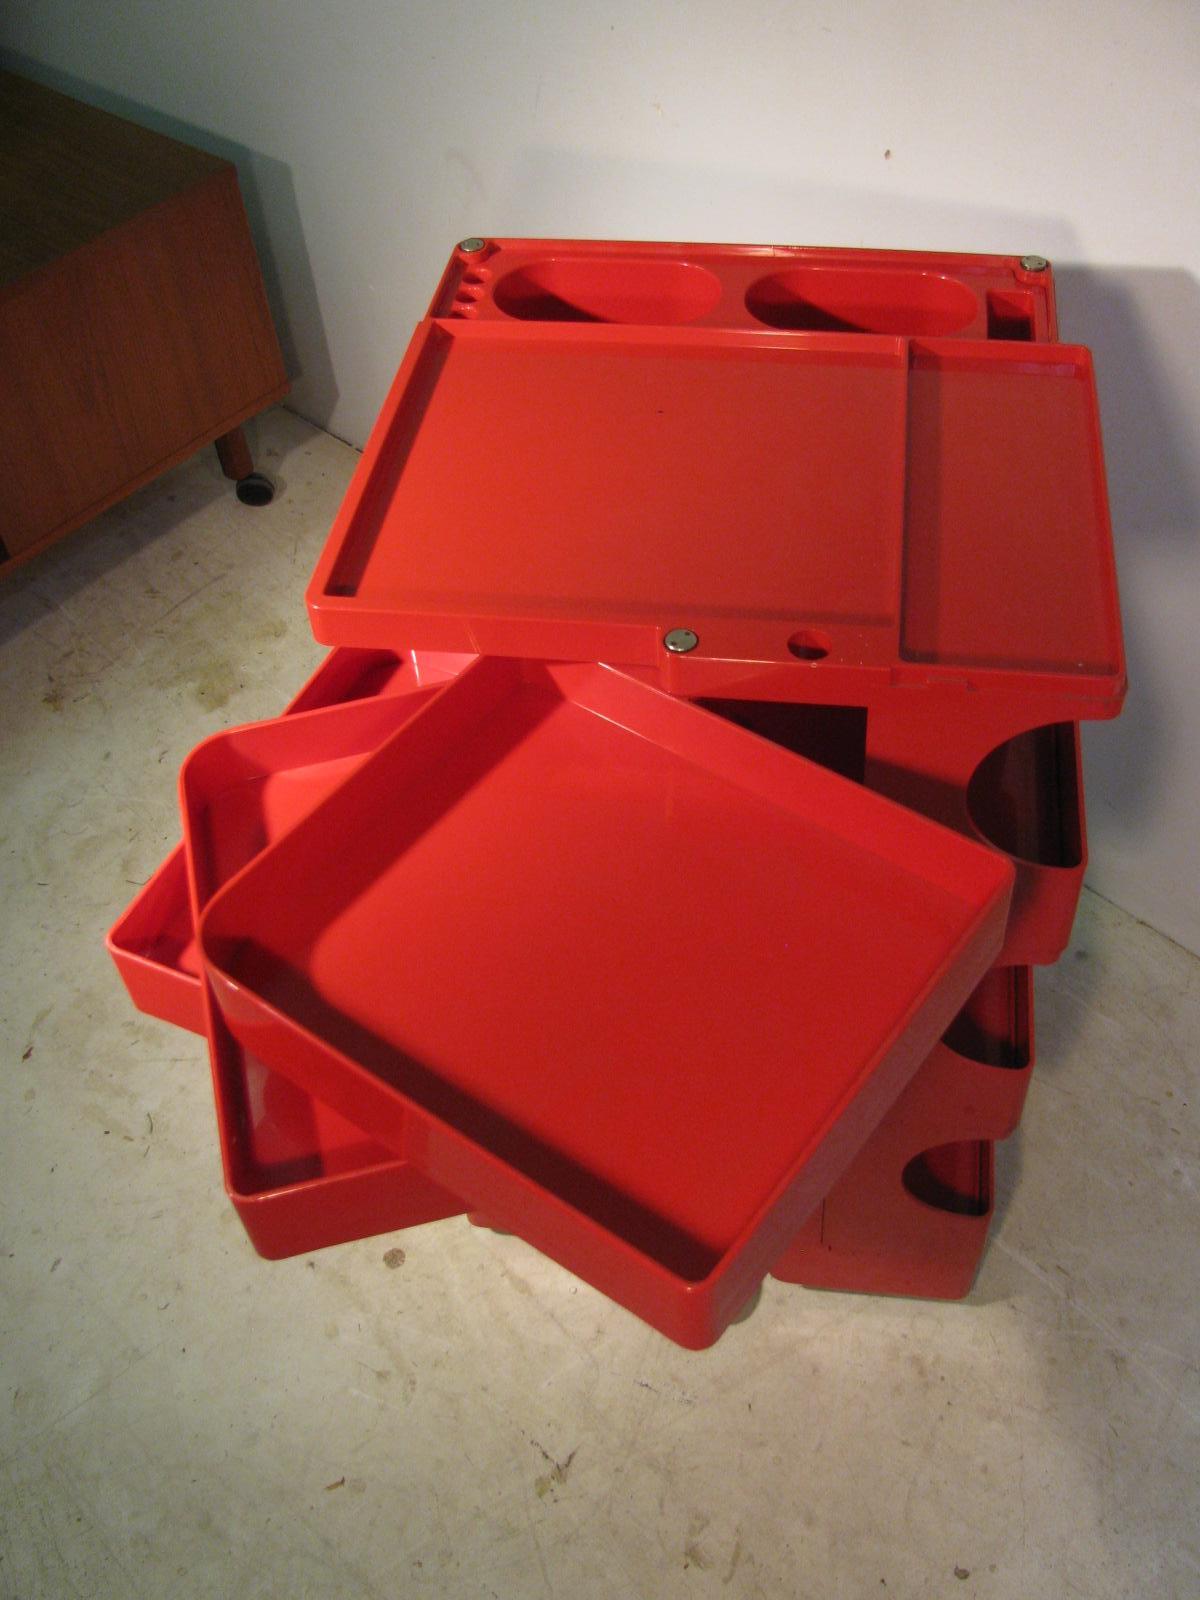 Fabulous red trolley work station Boby Cart by Bieffleplast for Joe Columbo. Versatile cart which is in the permanent collection of both the MOMA and the Triennale in Milan. Has a few minor scratches on top. Insert tray (pictured) and separation